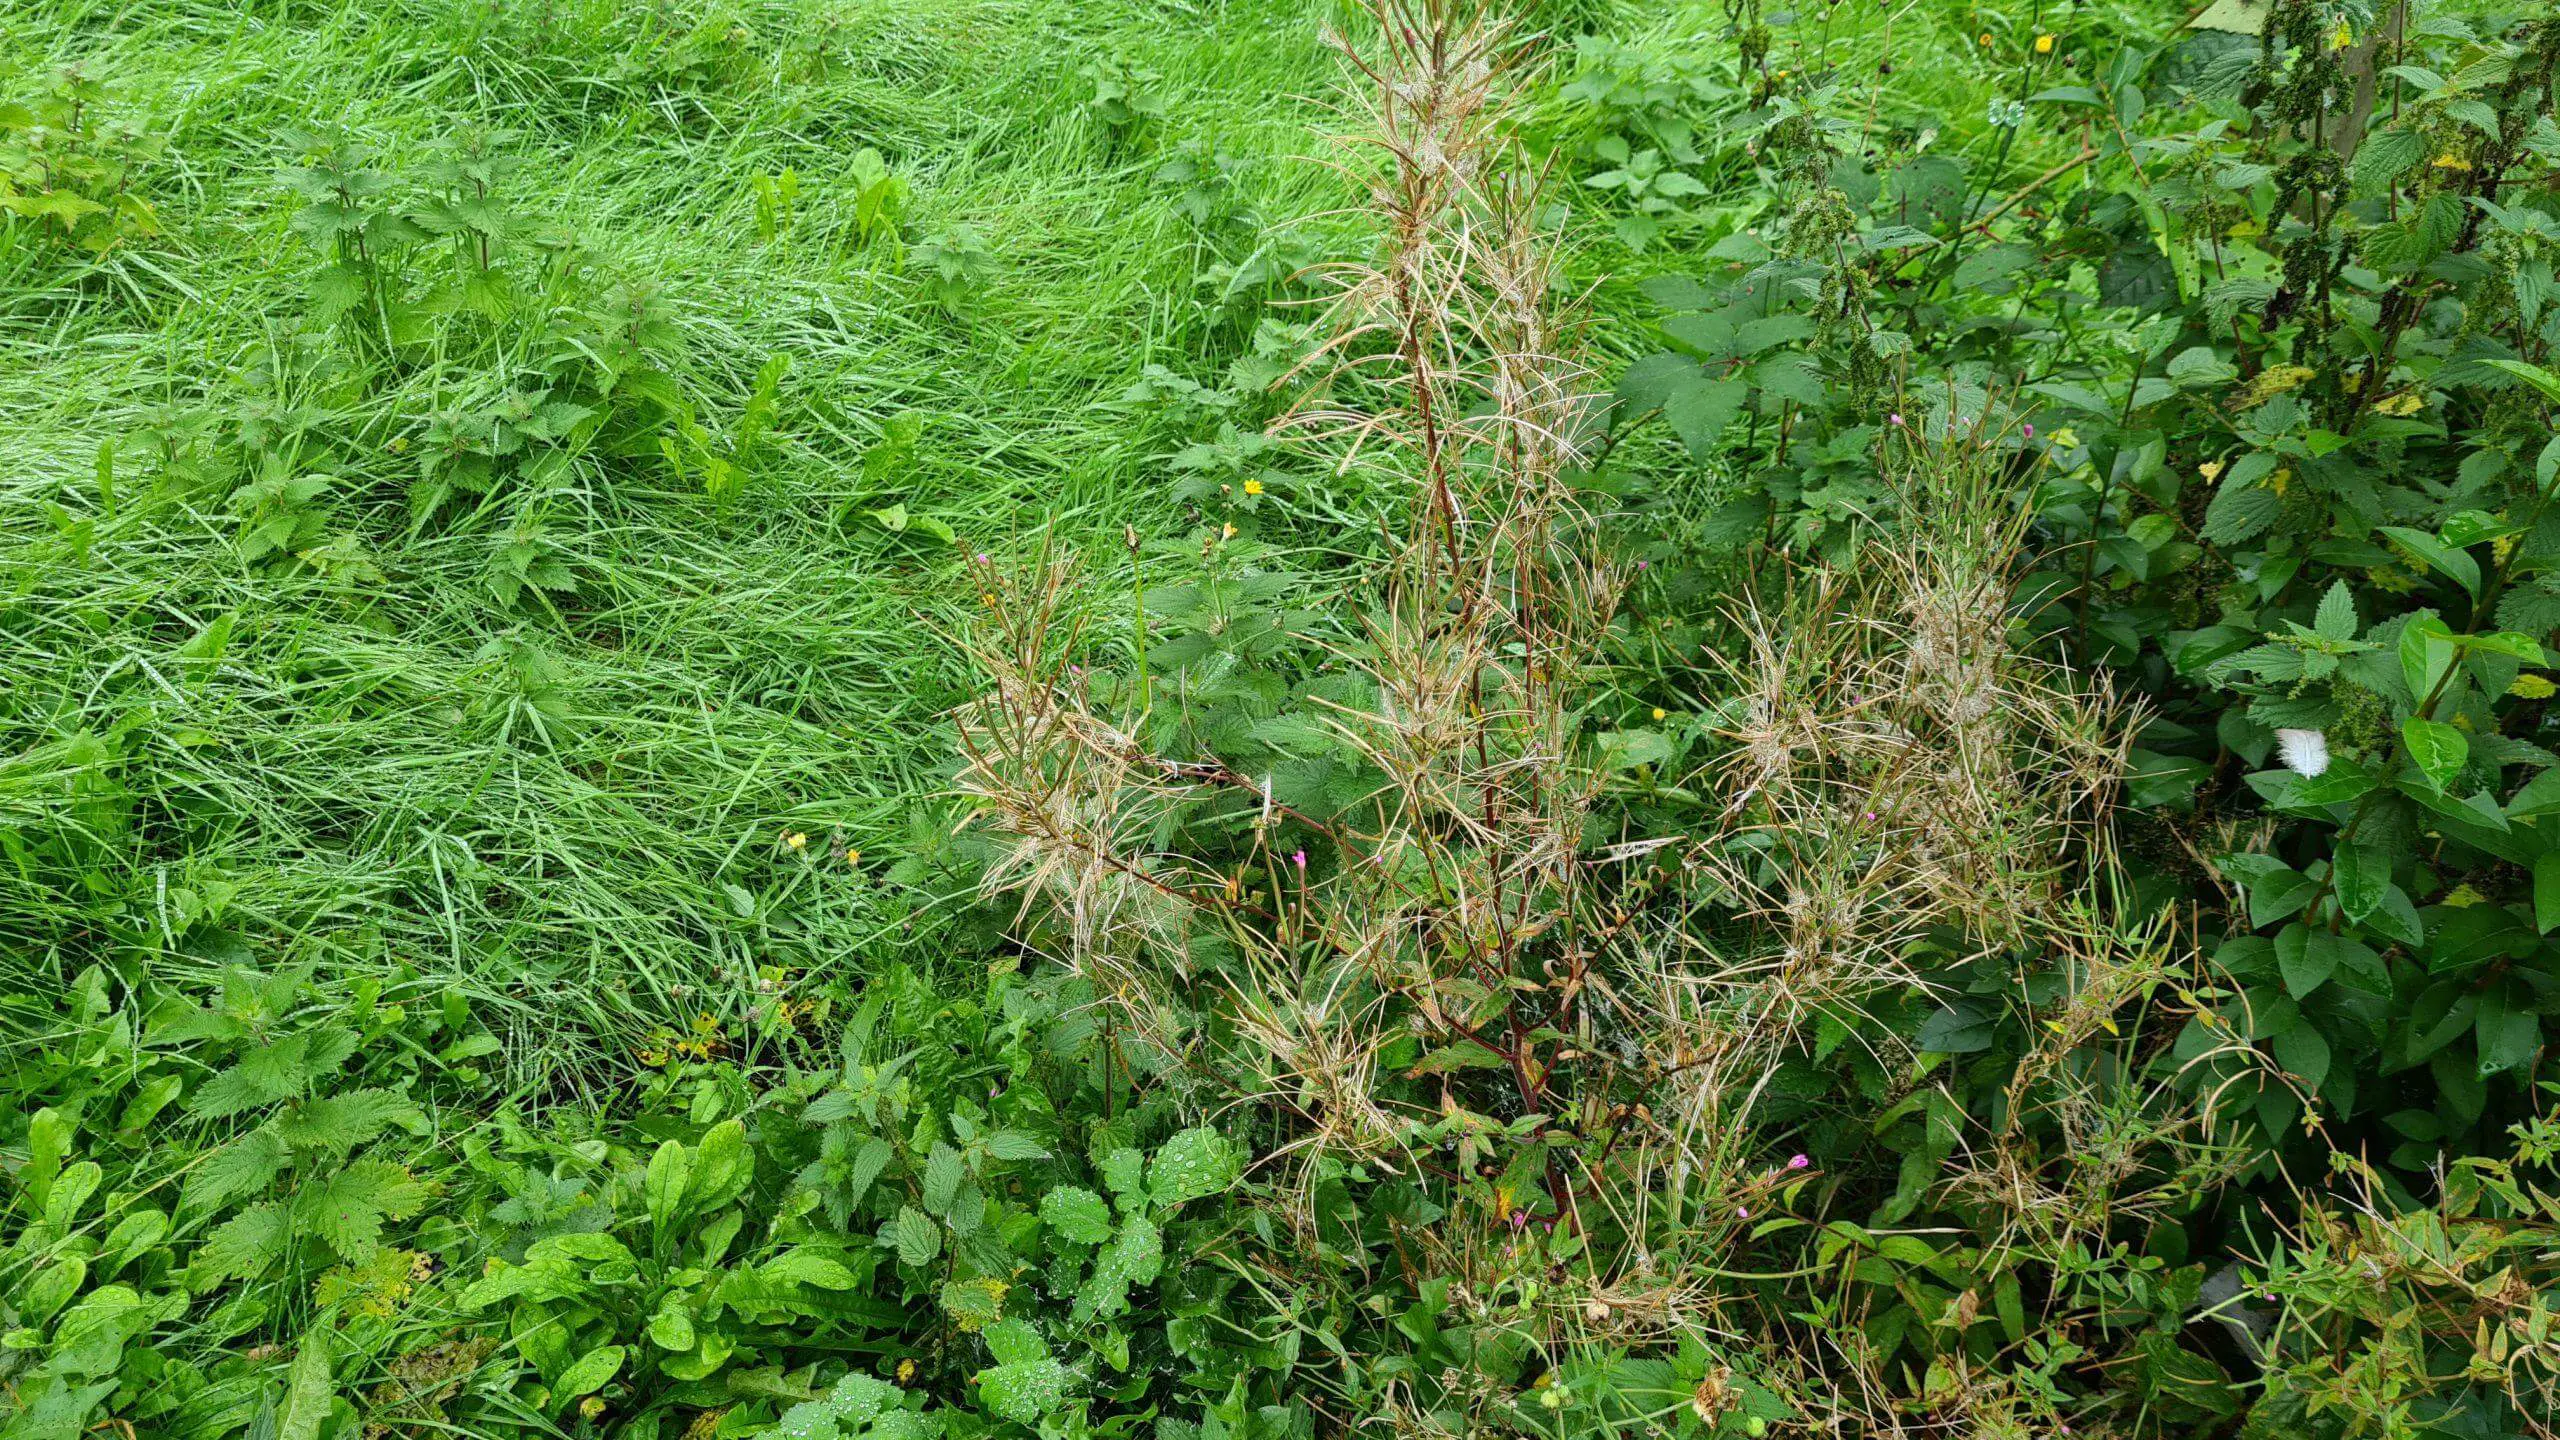 Clearing invasive weeds from your garden neednt be costly or time consuming if you know how best to tackle them. Prepare and planning are the key to success